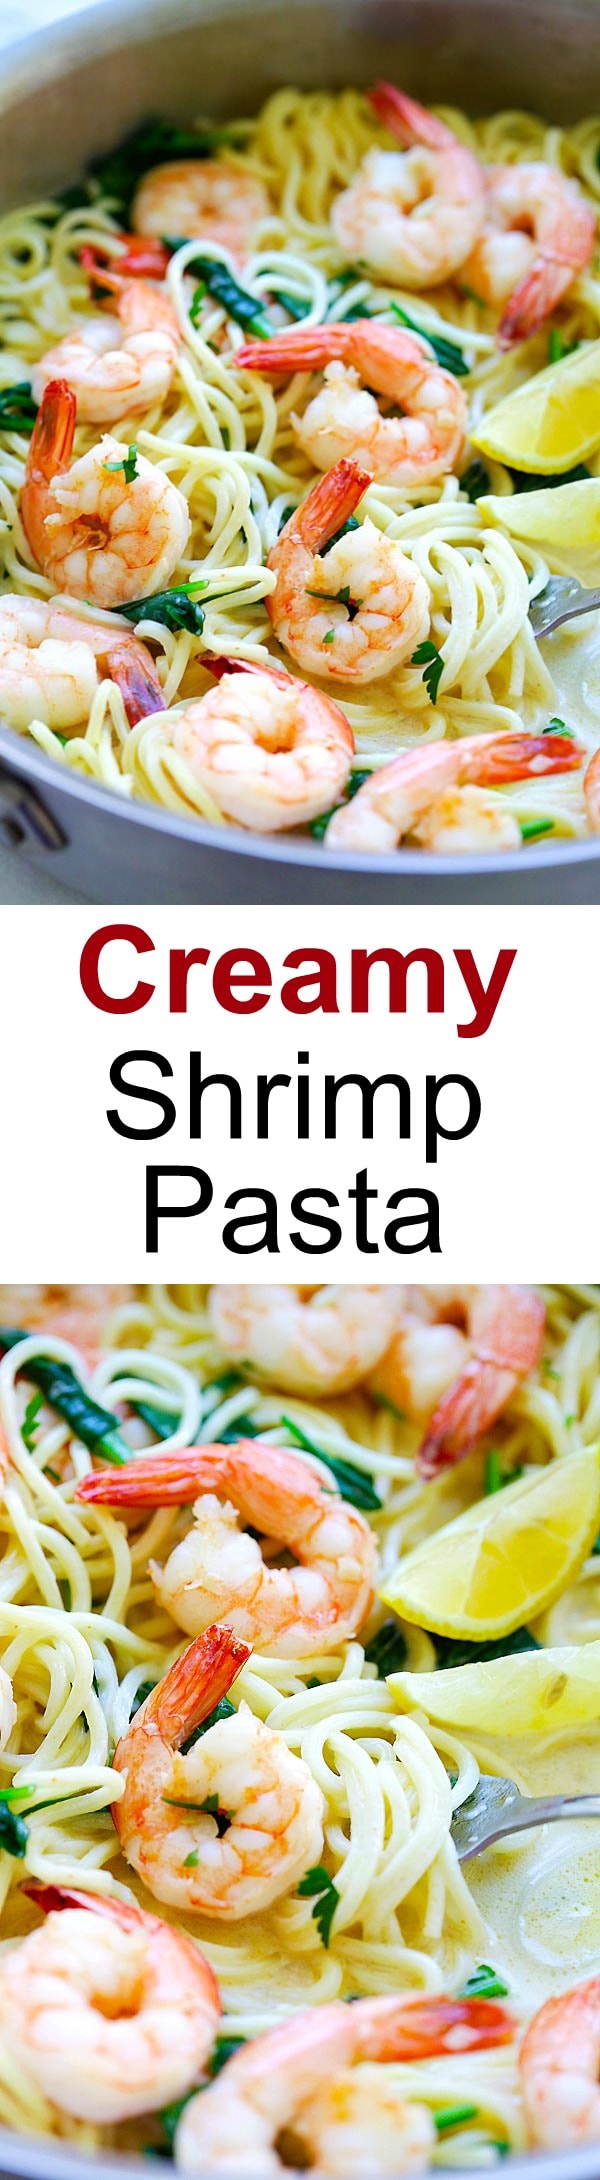 Creamy Shrimp Pasta – easy pasta recipe with shrimp, spaghetti in a buttery and creamy sauce. Cooked in one pot, dinner is ready in 20 mins | rasamalaysia.com